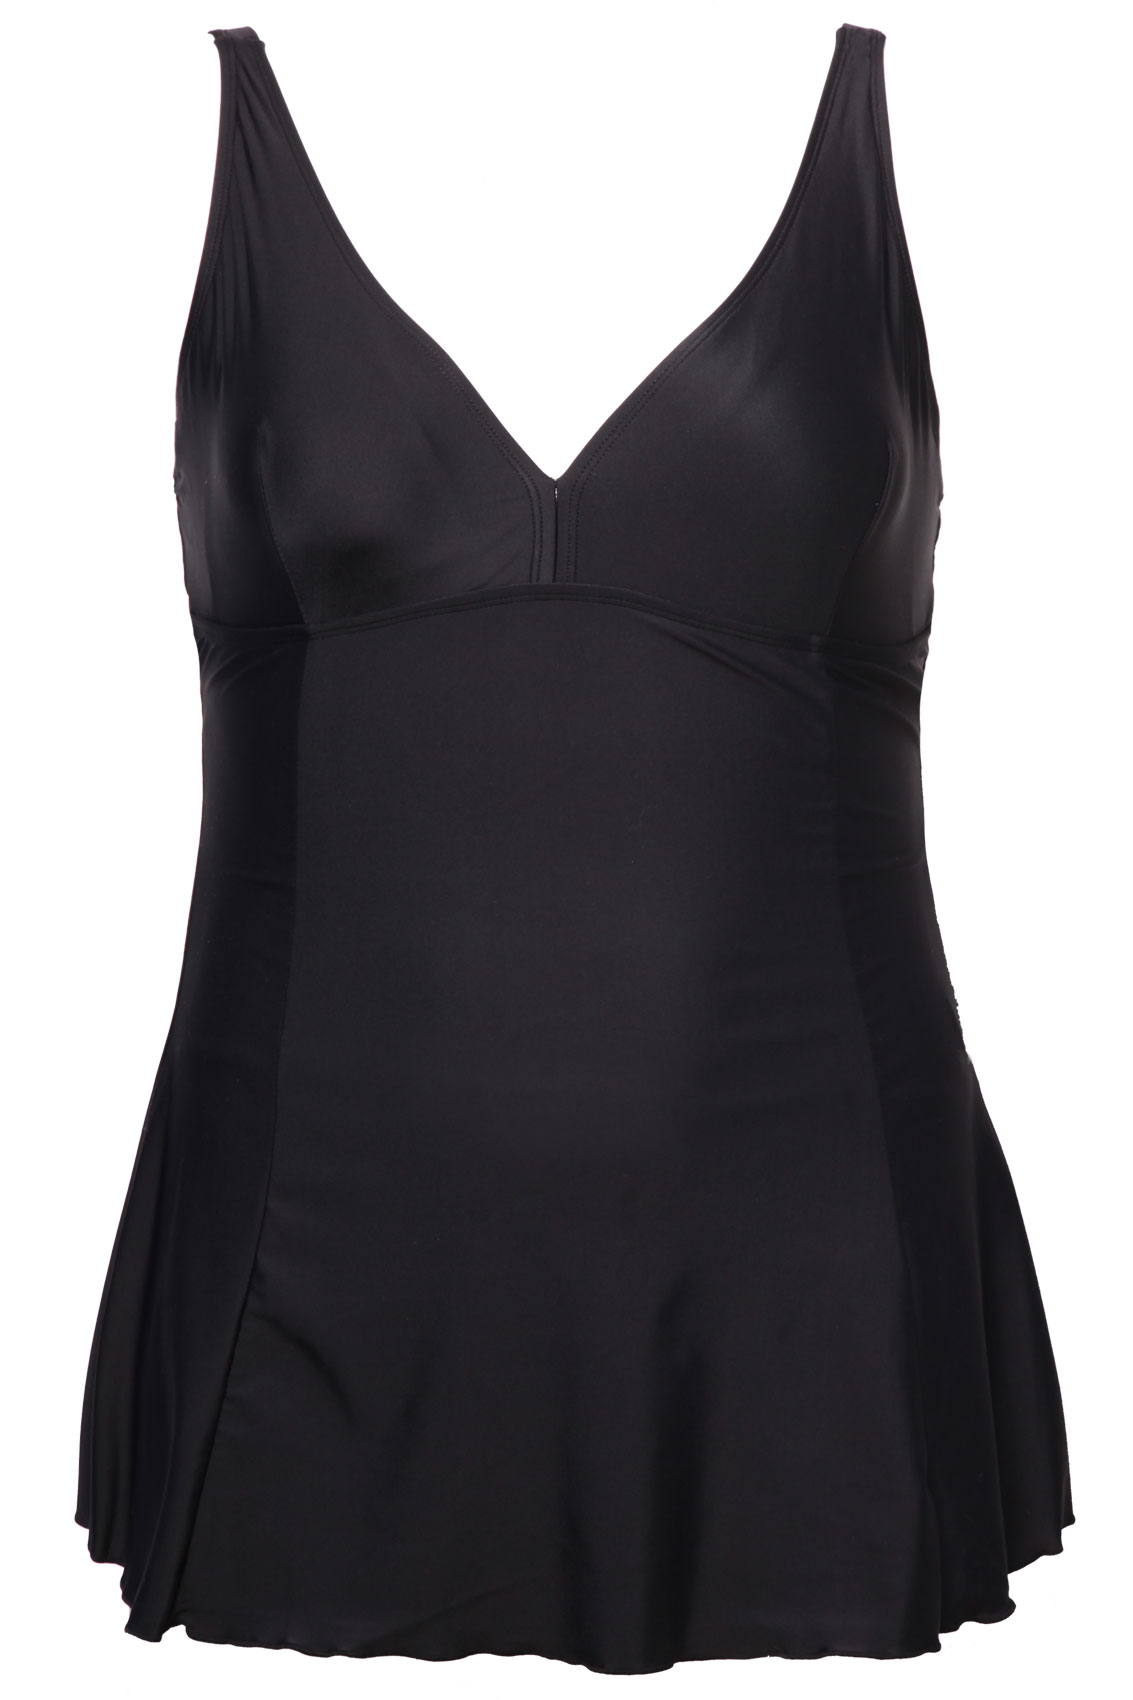 Black Skirted Swimsuit With TUMMY CONTROL Plus Size 16,18,20,22,24,26 ...